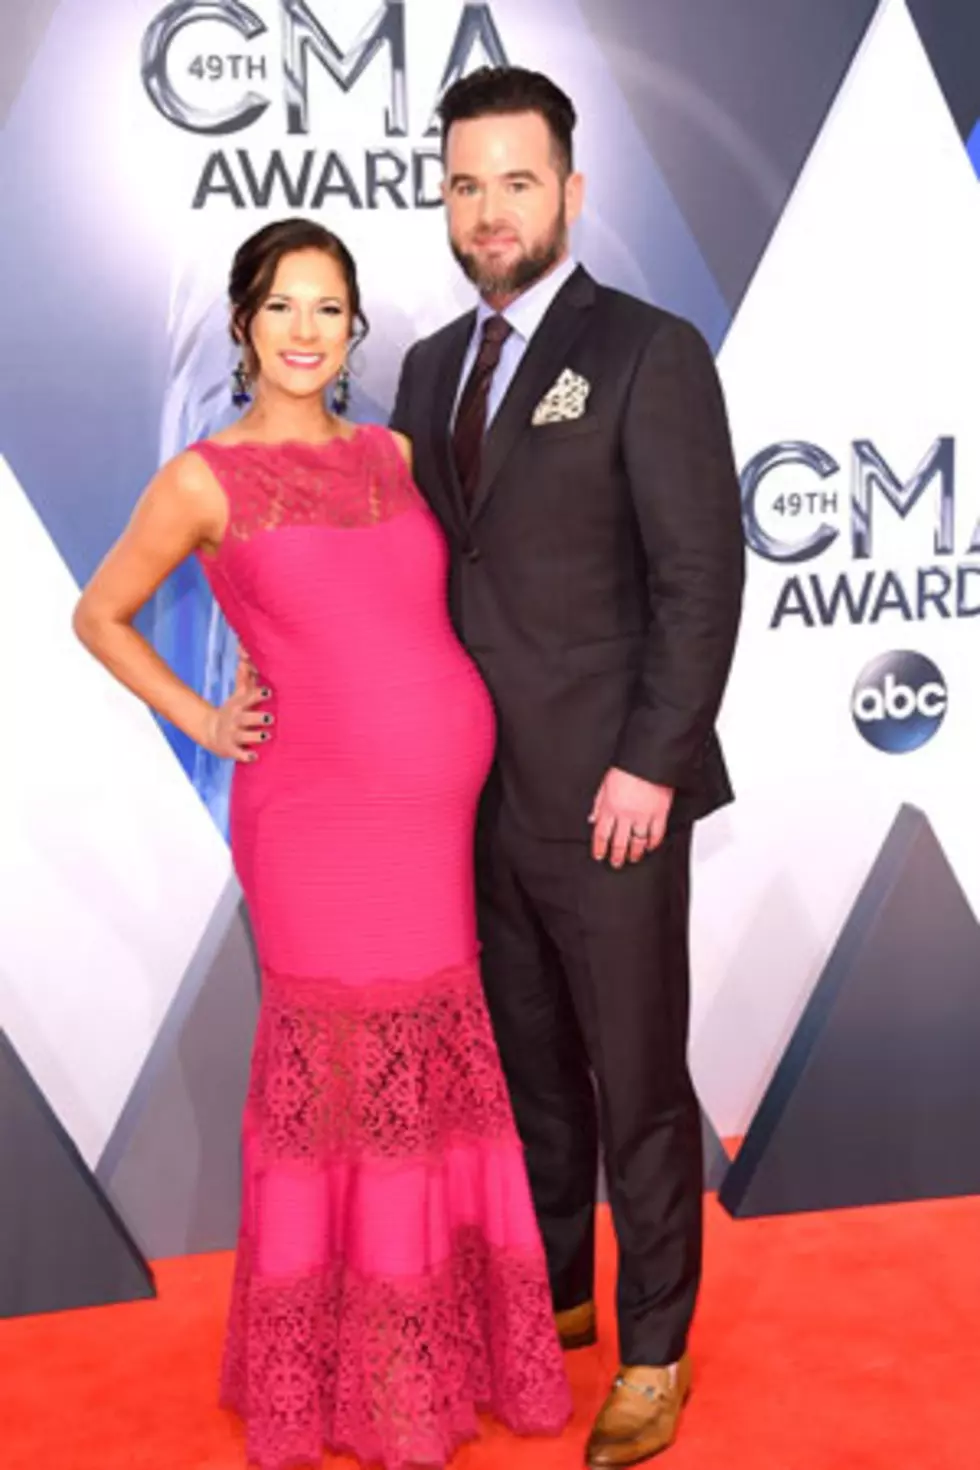 David Nail and Wife Expecting Twins